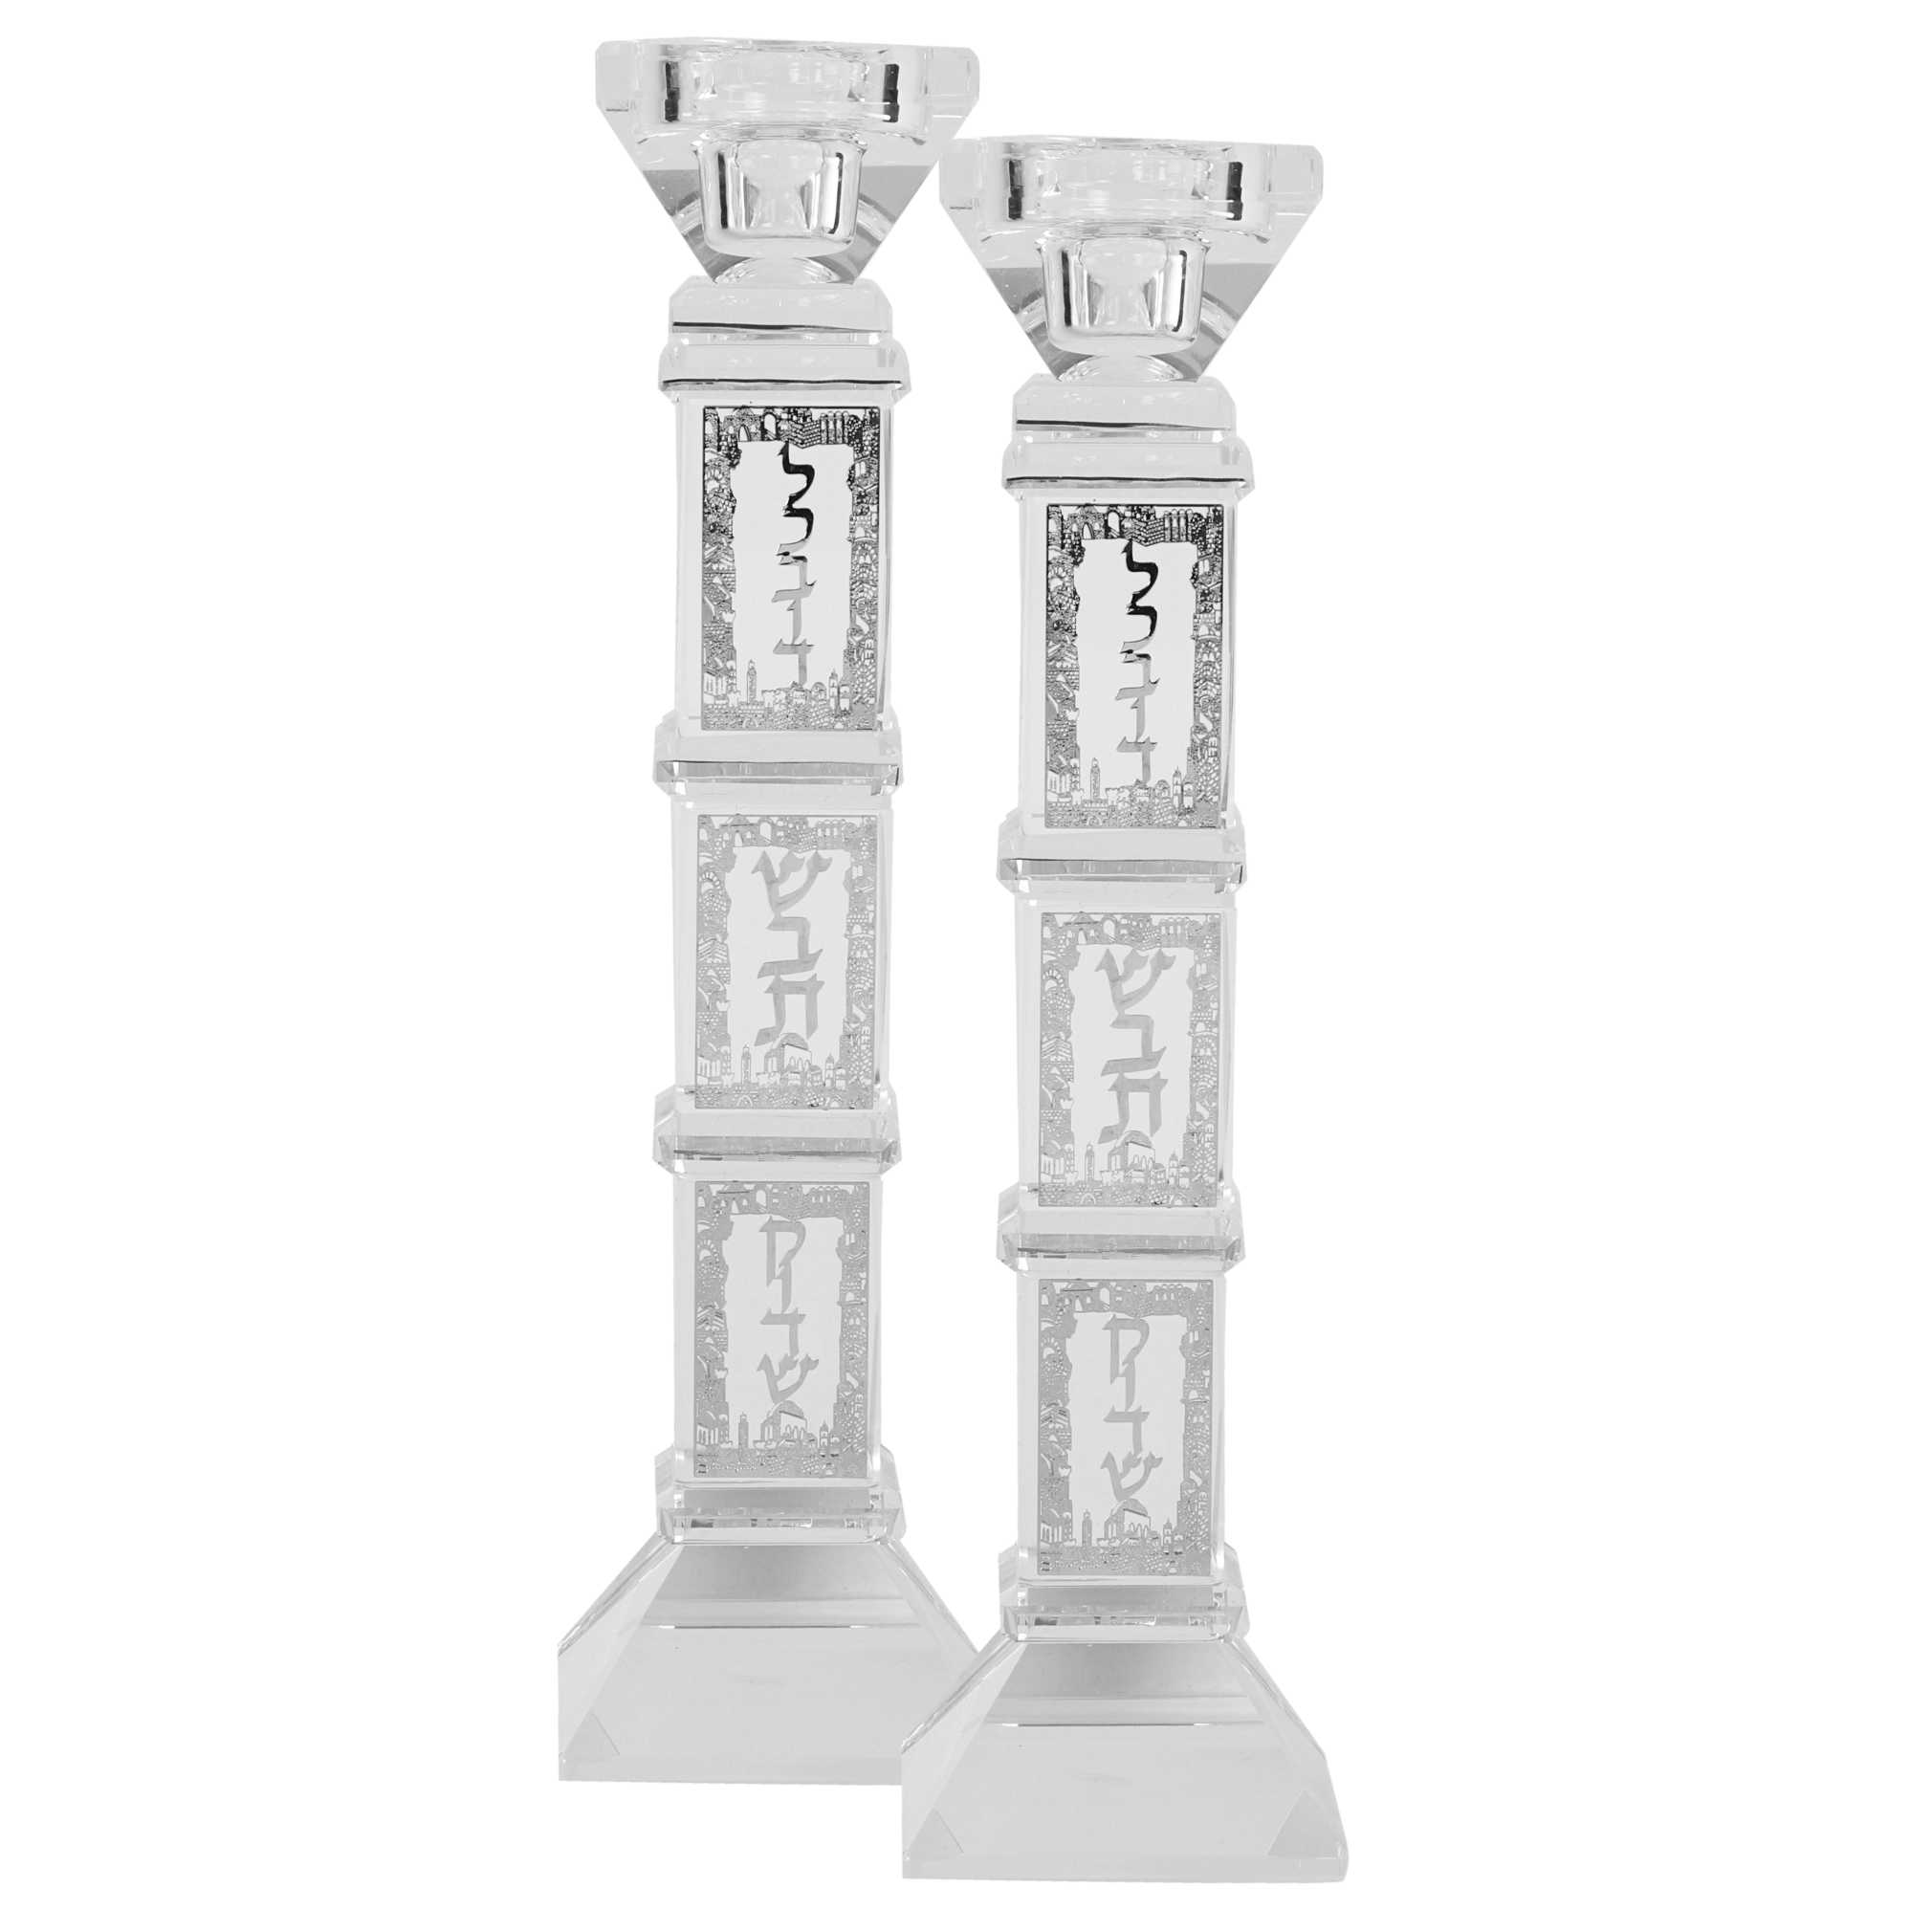 Crystal And Silver Candlesticks 9"h X 1.25"w